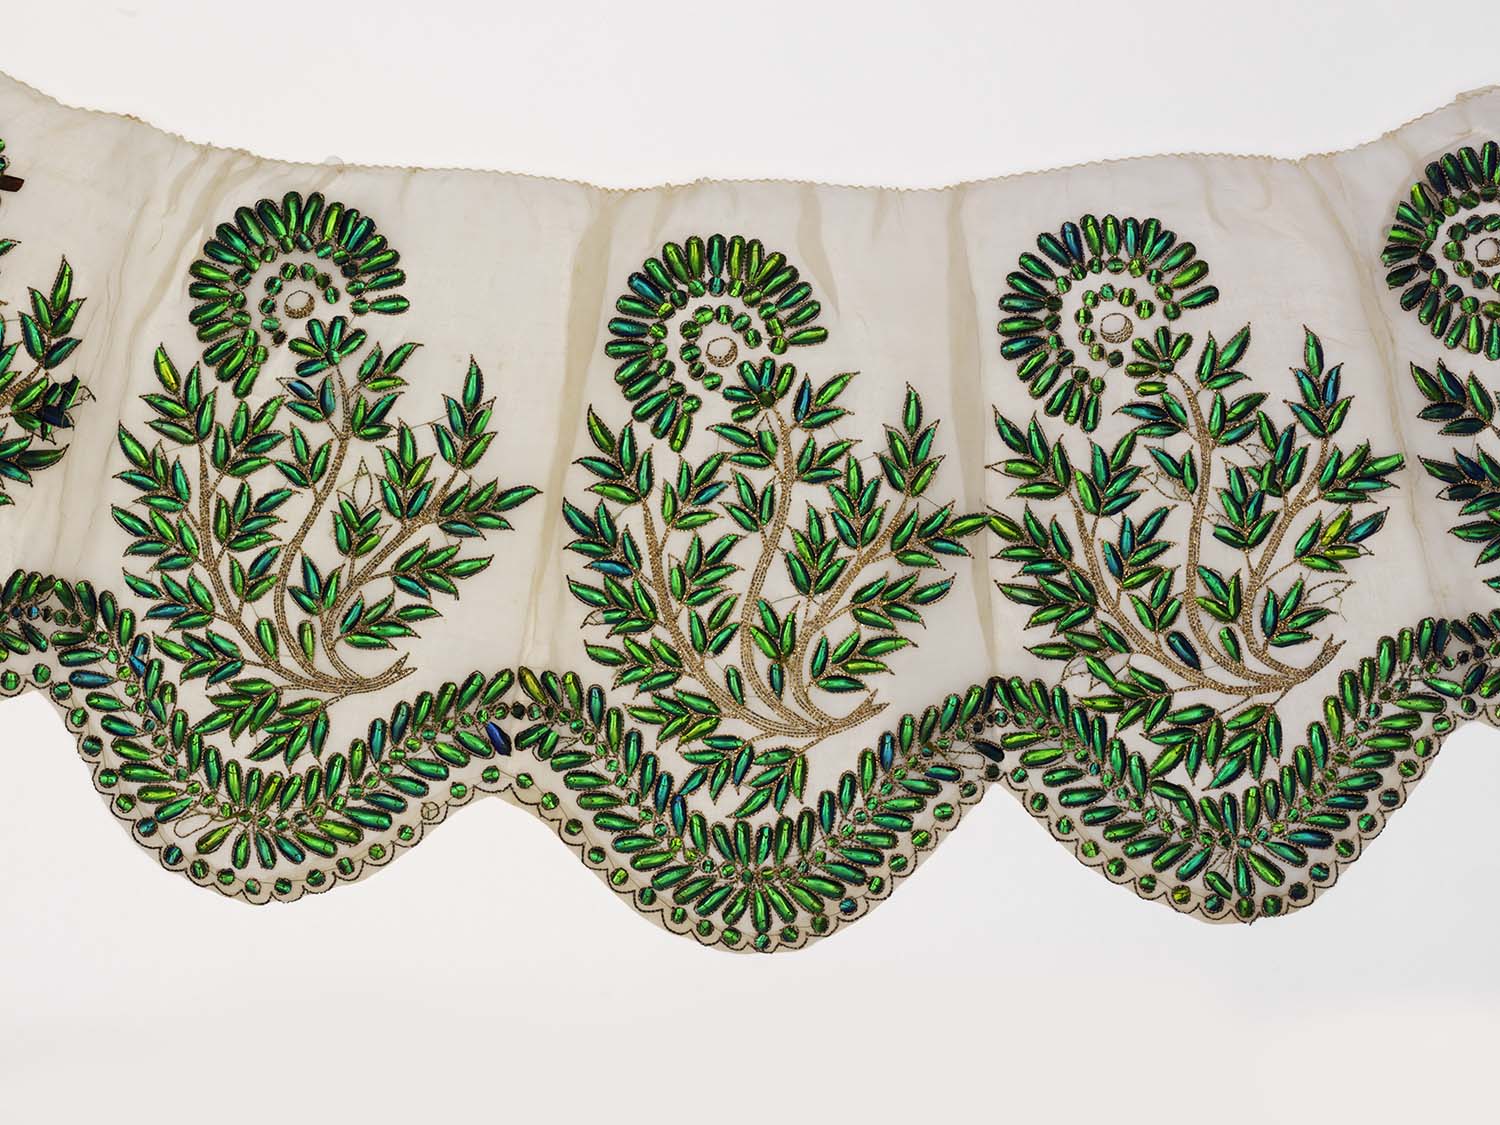 dress with a pattern of decorative green leafed tree branches 